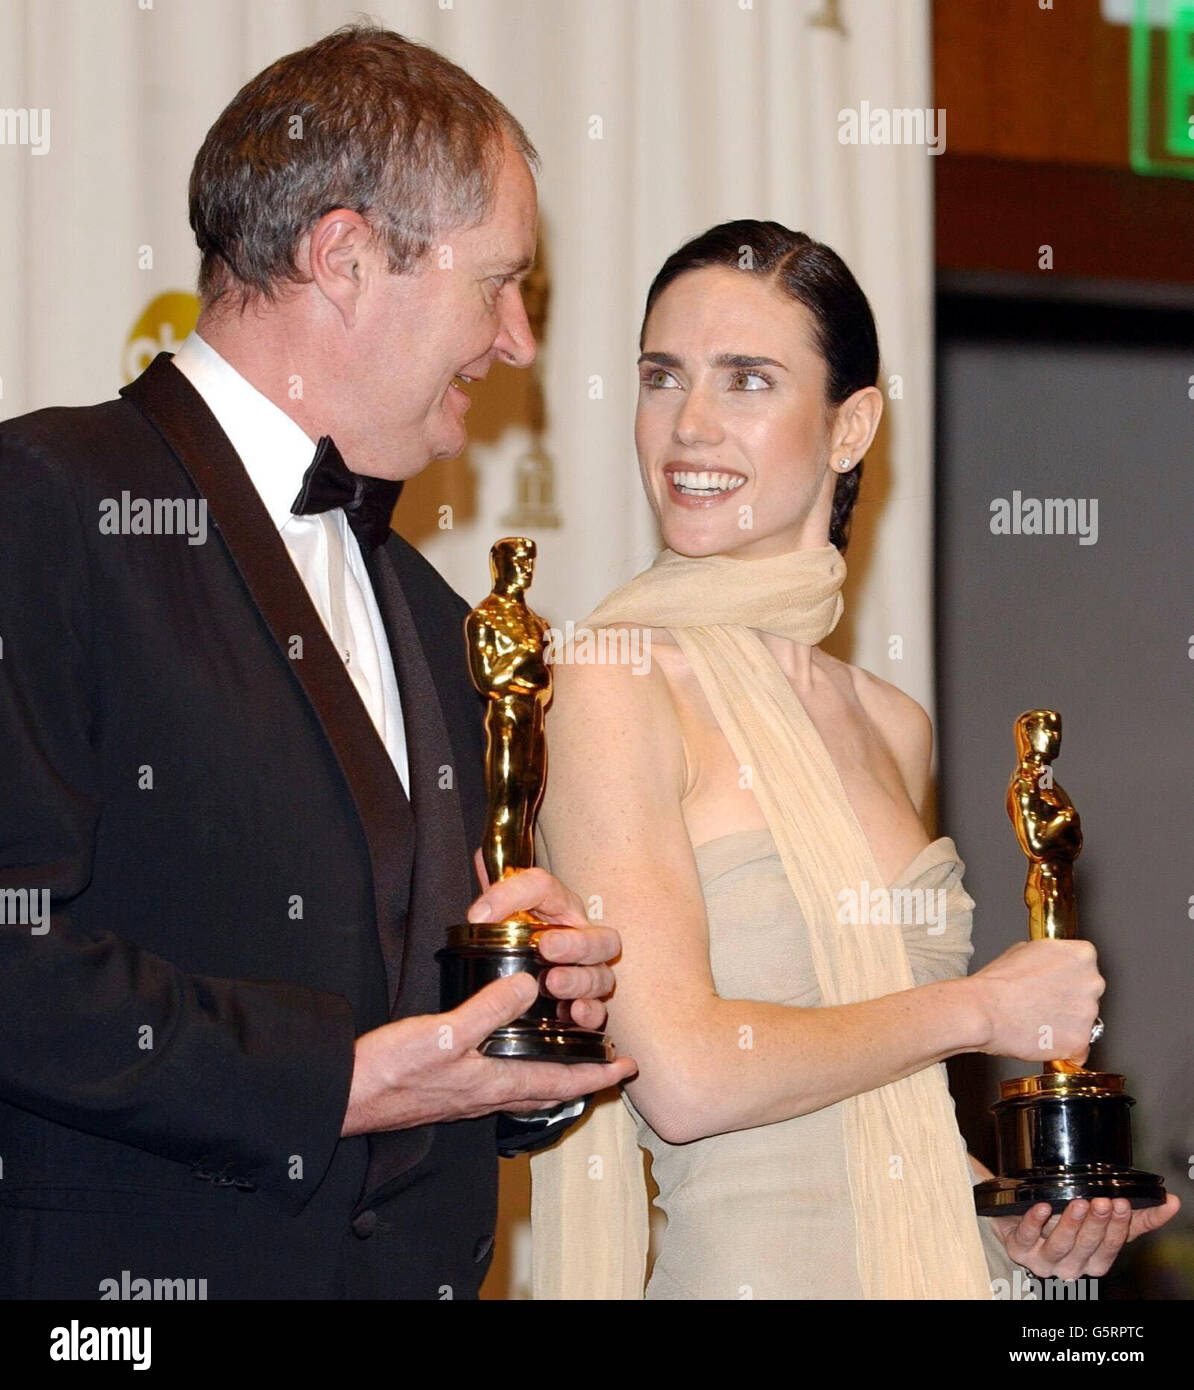 Jennifer Connelly with her Best Supporting Actress Award for the film A Beautiful Mind and Jim Broadbent with his Best Supporting Actor award for Iris at the 74th Annual Academy Awards (Oscars) at the Kodak Theatre in Hollywood, Los Angeles. Stock Photo